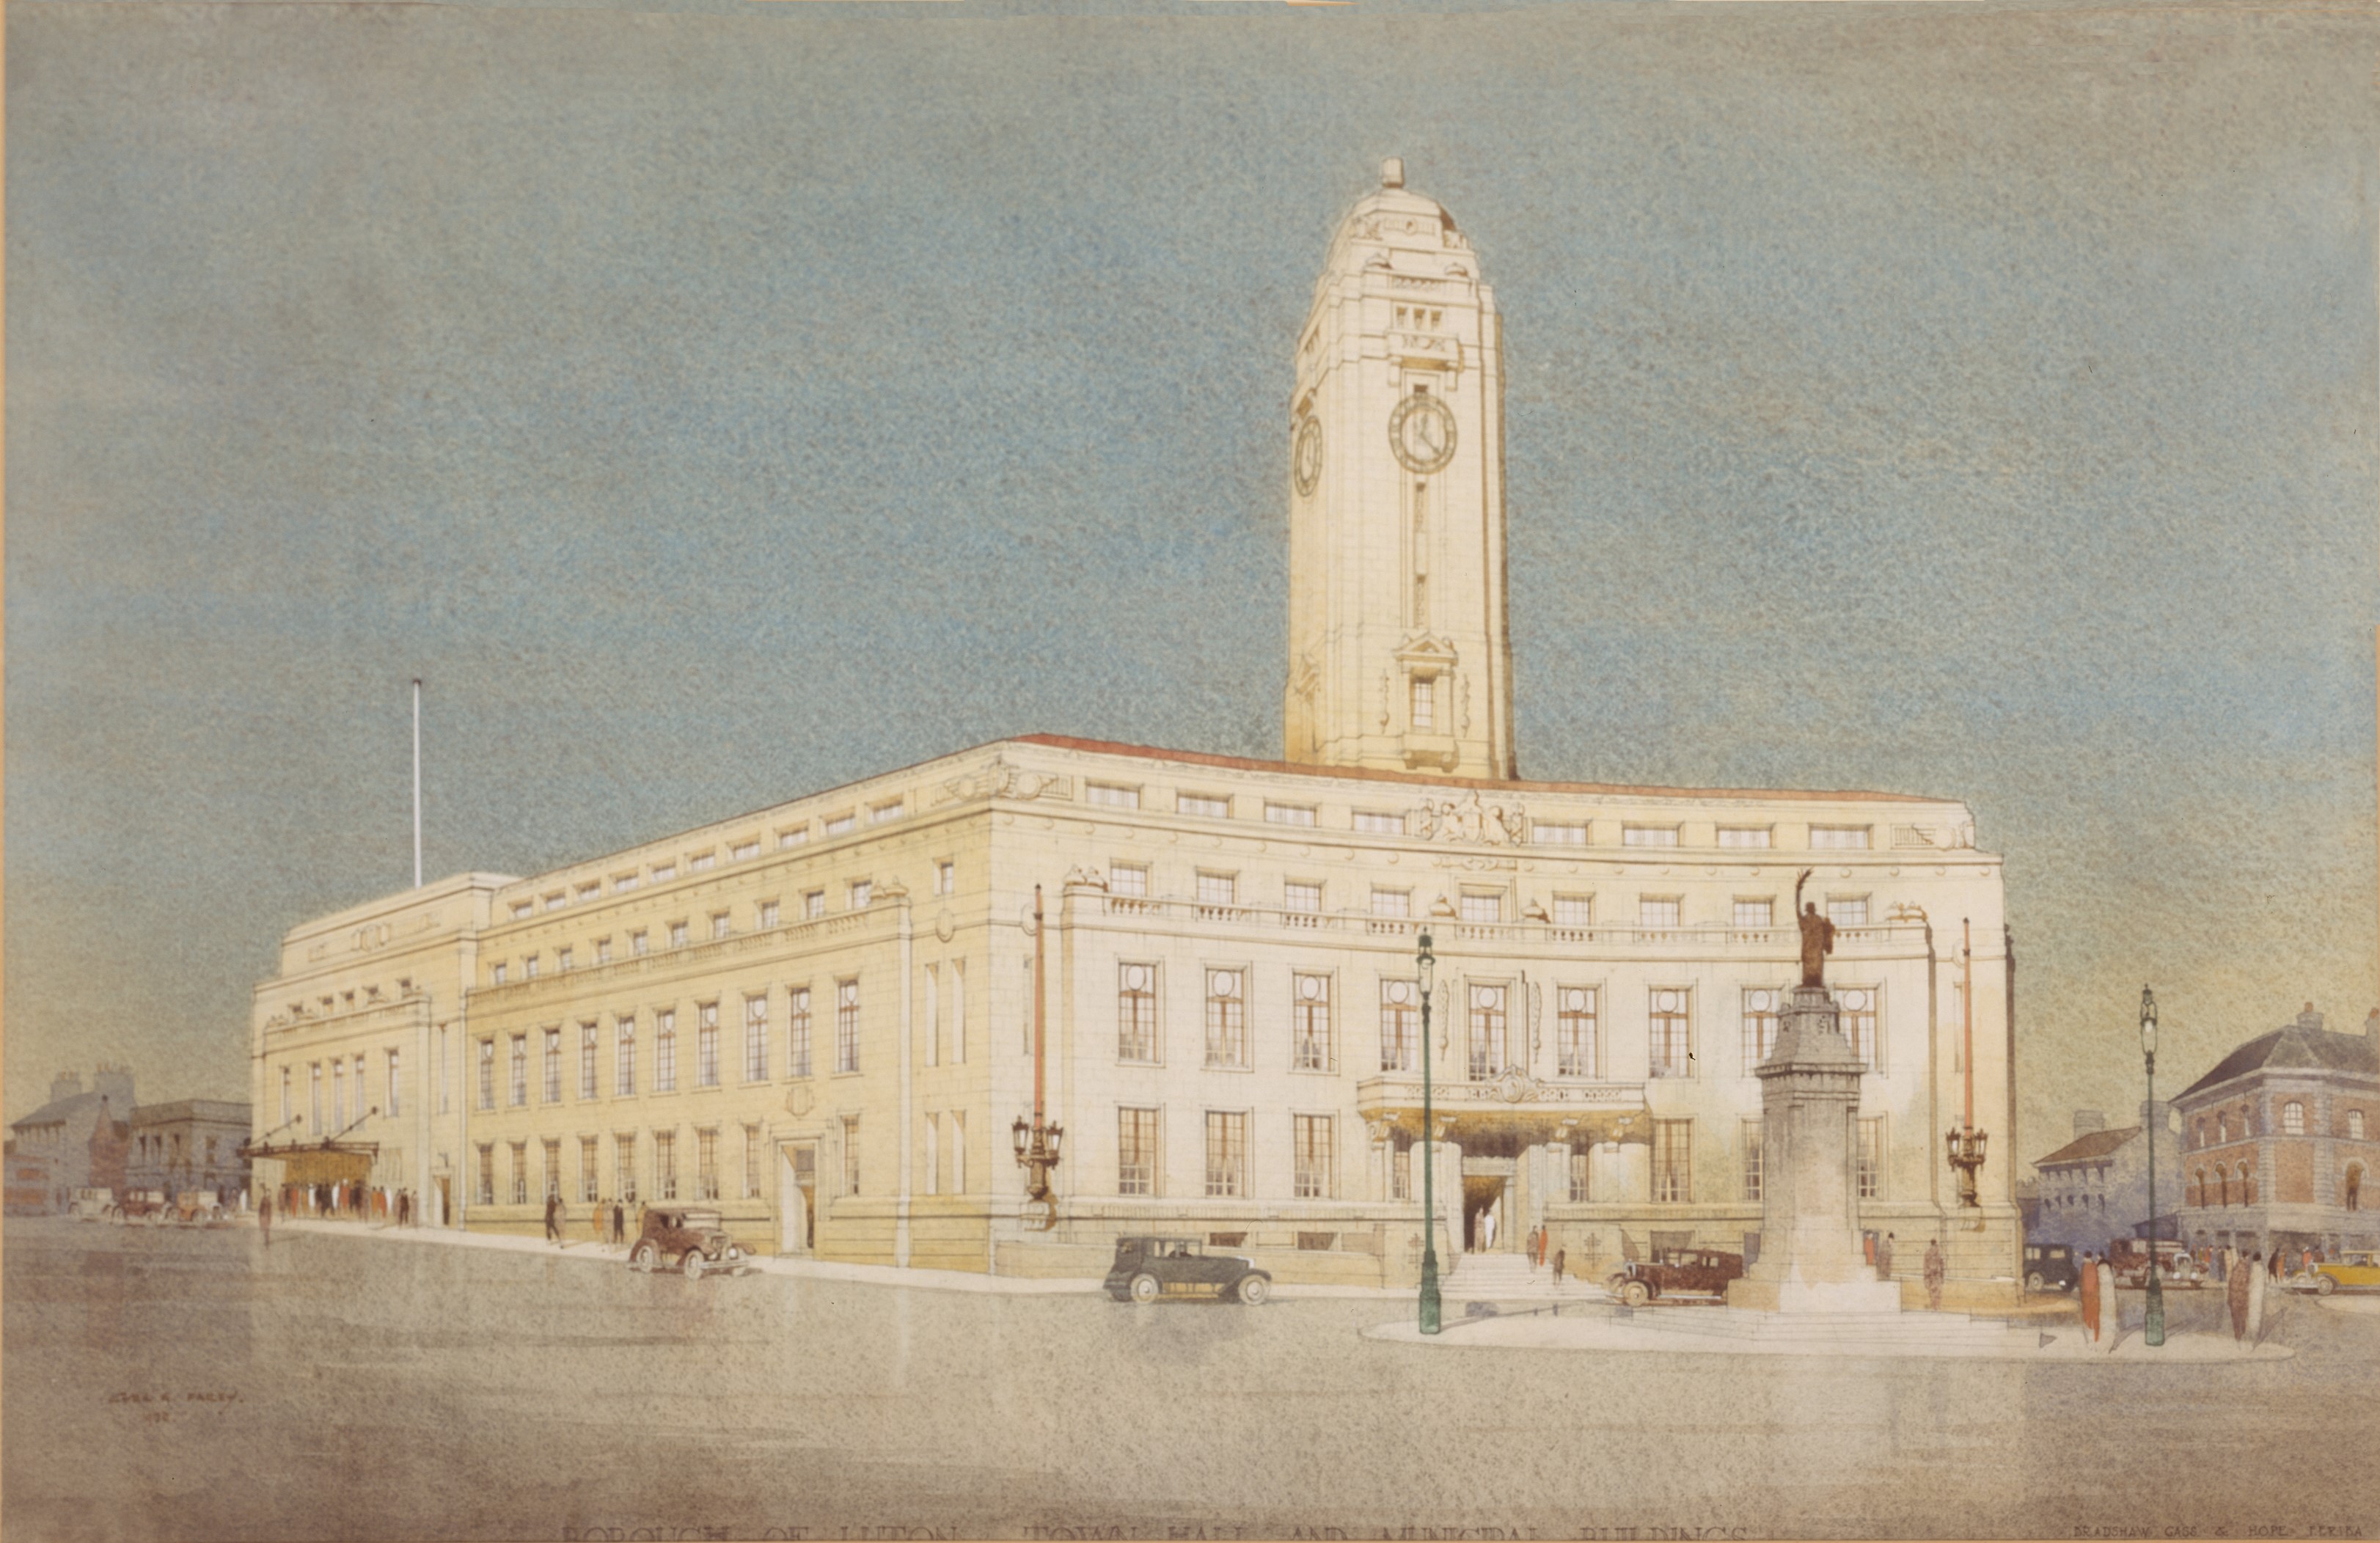 Luton Town Hall by Cyril Fairey